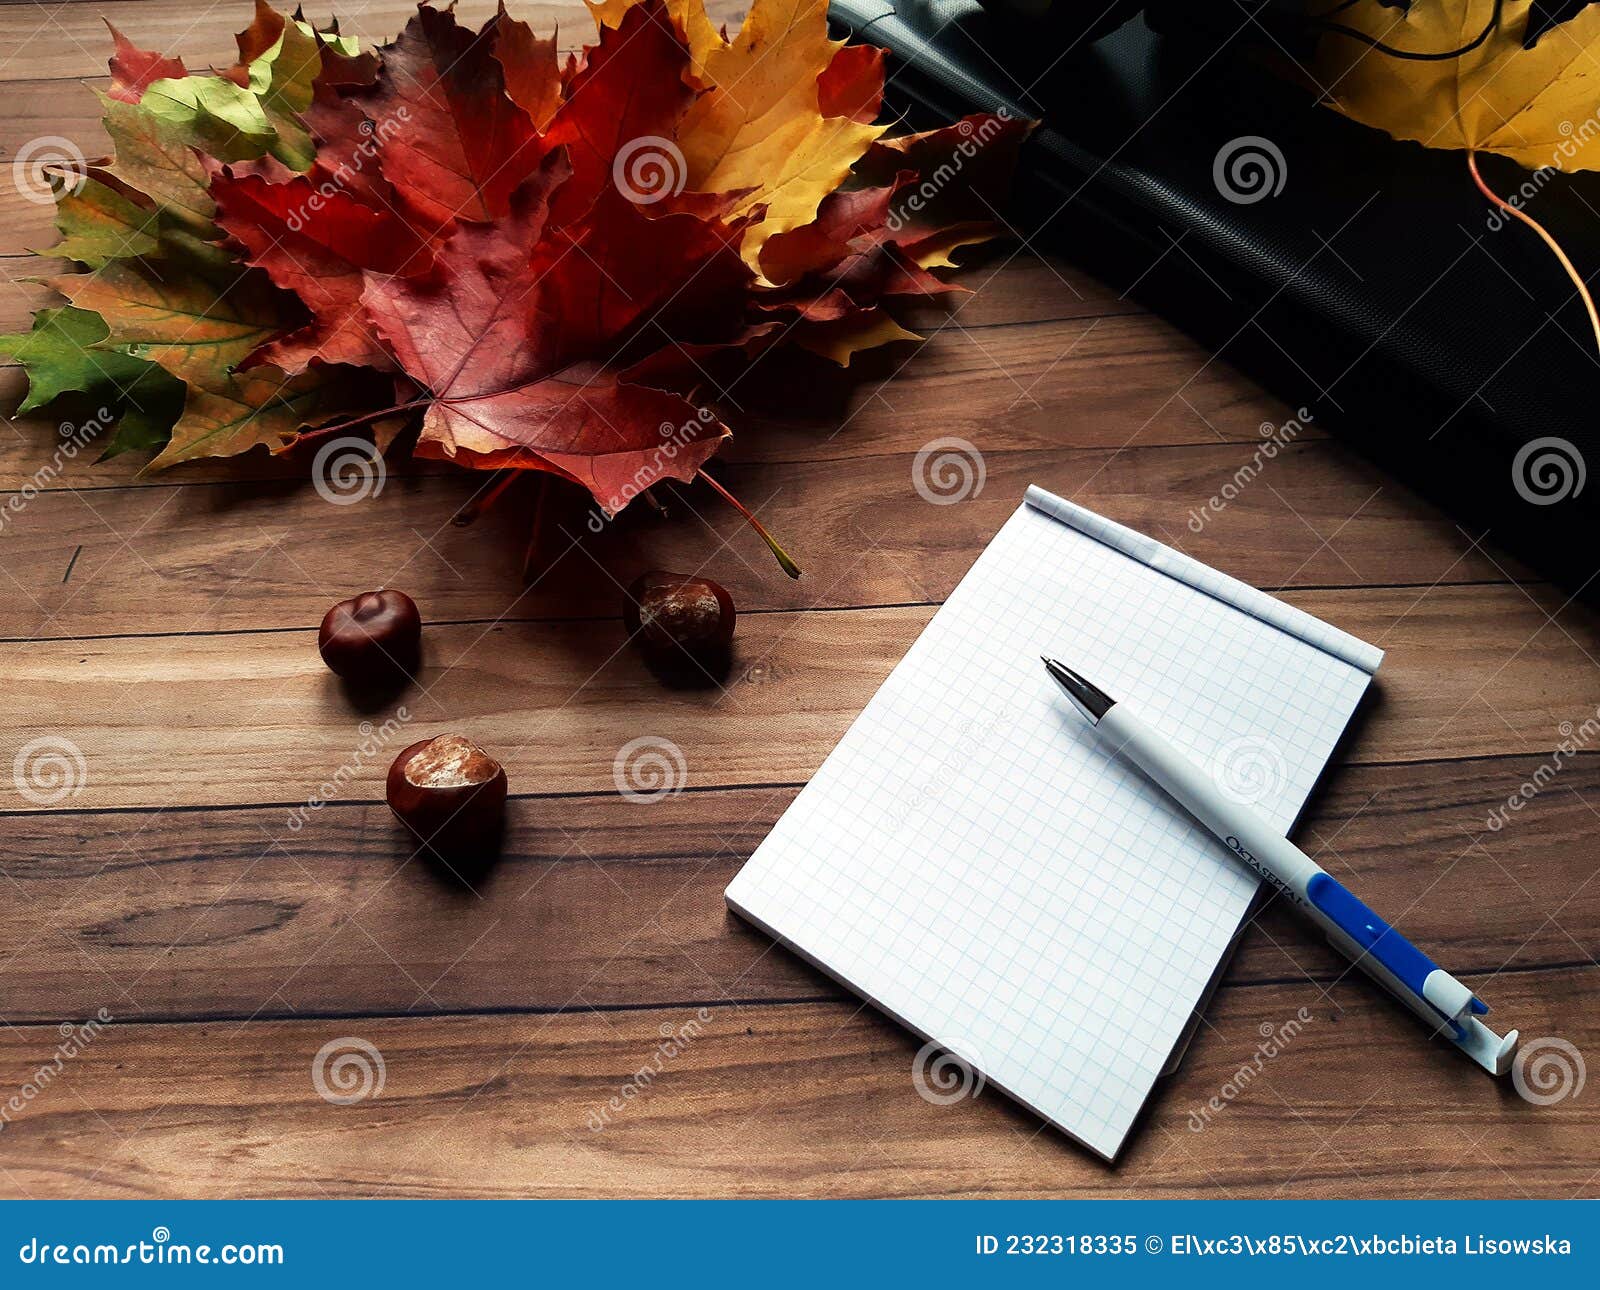 autumn leaves and chestnuts on a wooden table